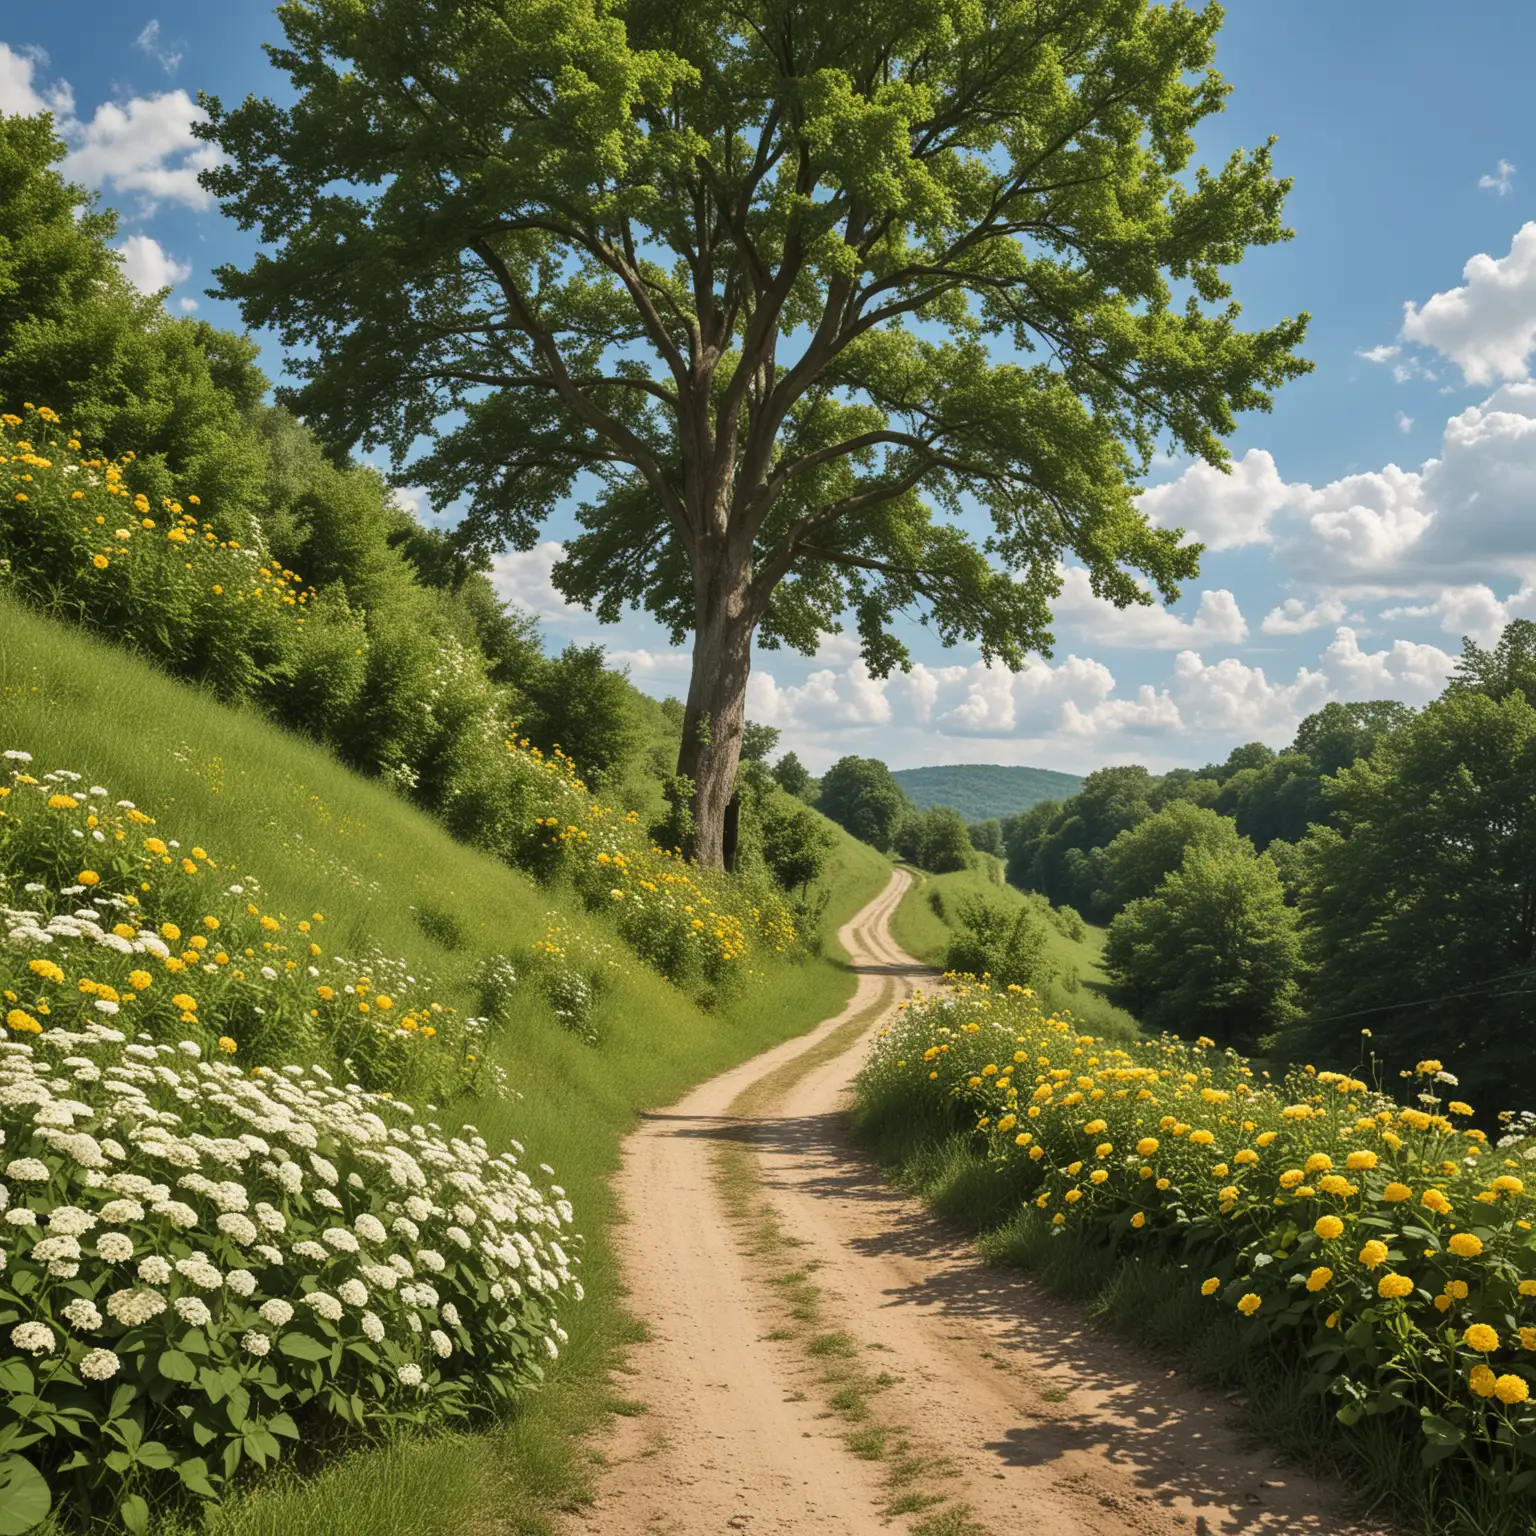 Rural Landscape with Dirt Road and Wildflowers under Blue Sky